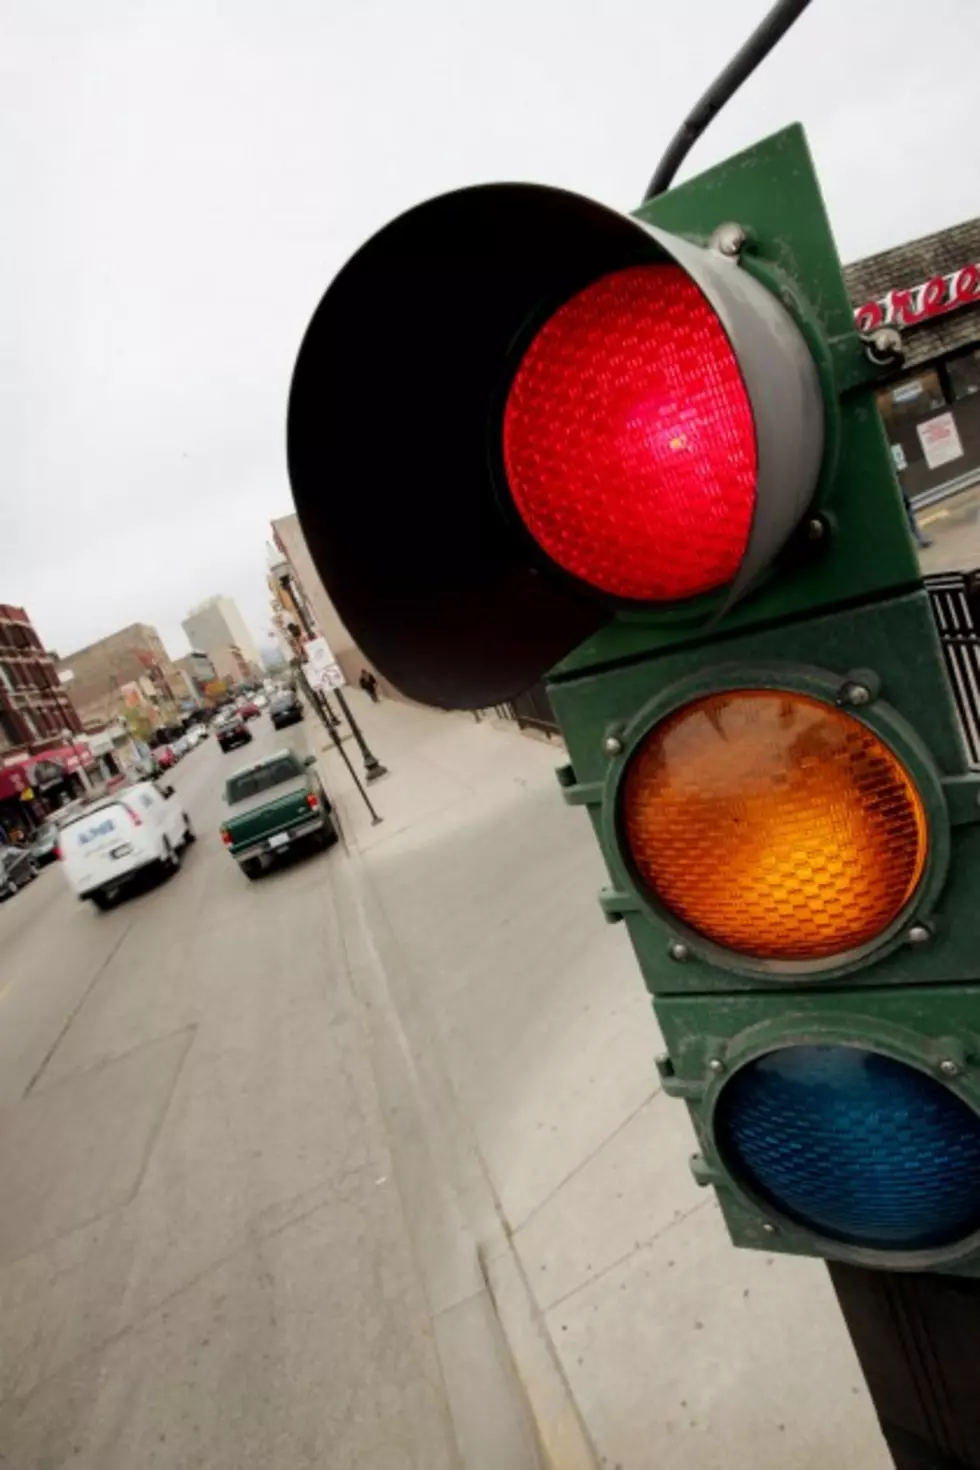 Yakima Signal Upgrade Wednesday Could Slow Your Commute